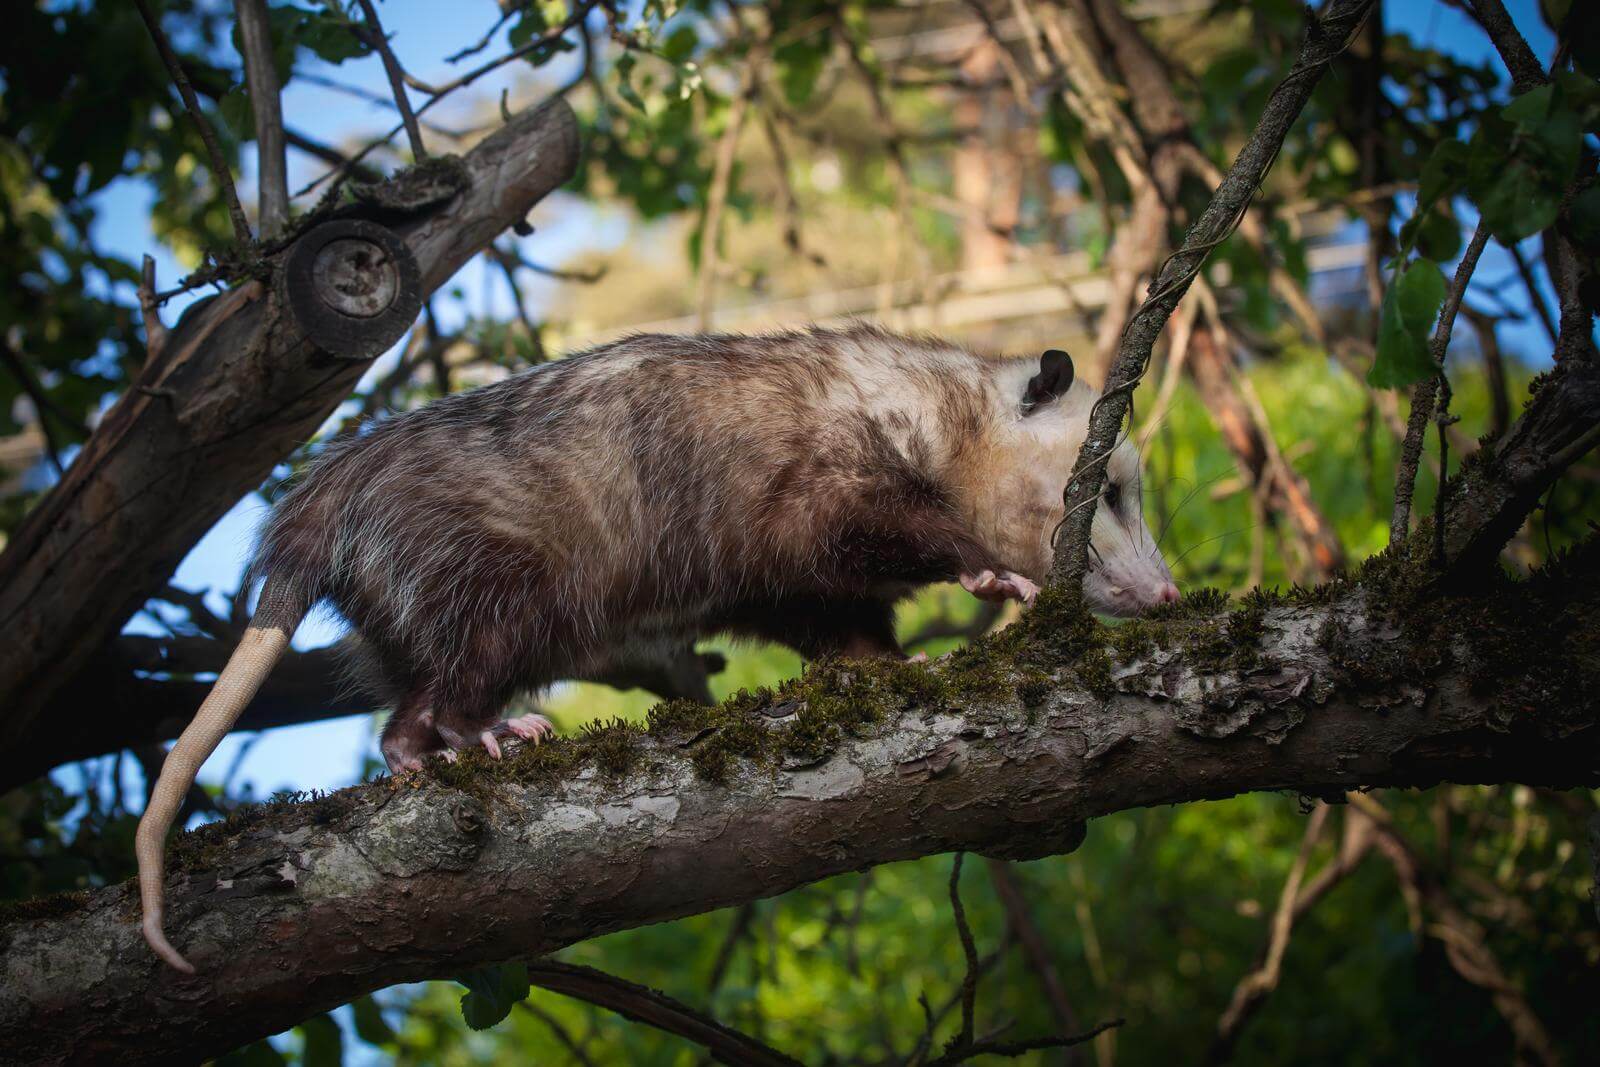 A large opossum gracefully walking along a tree branch